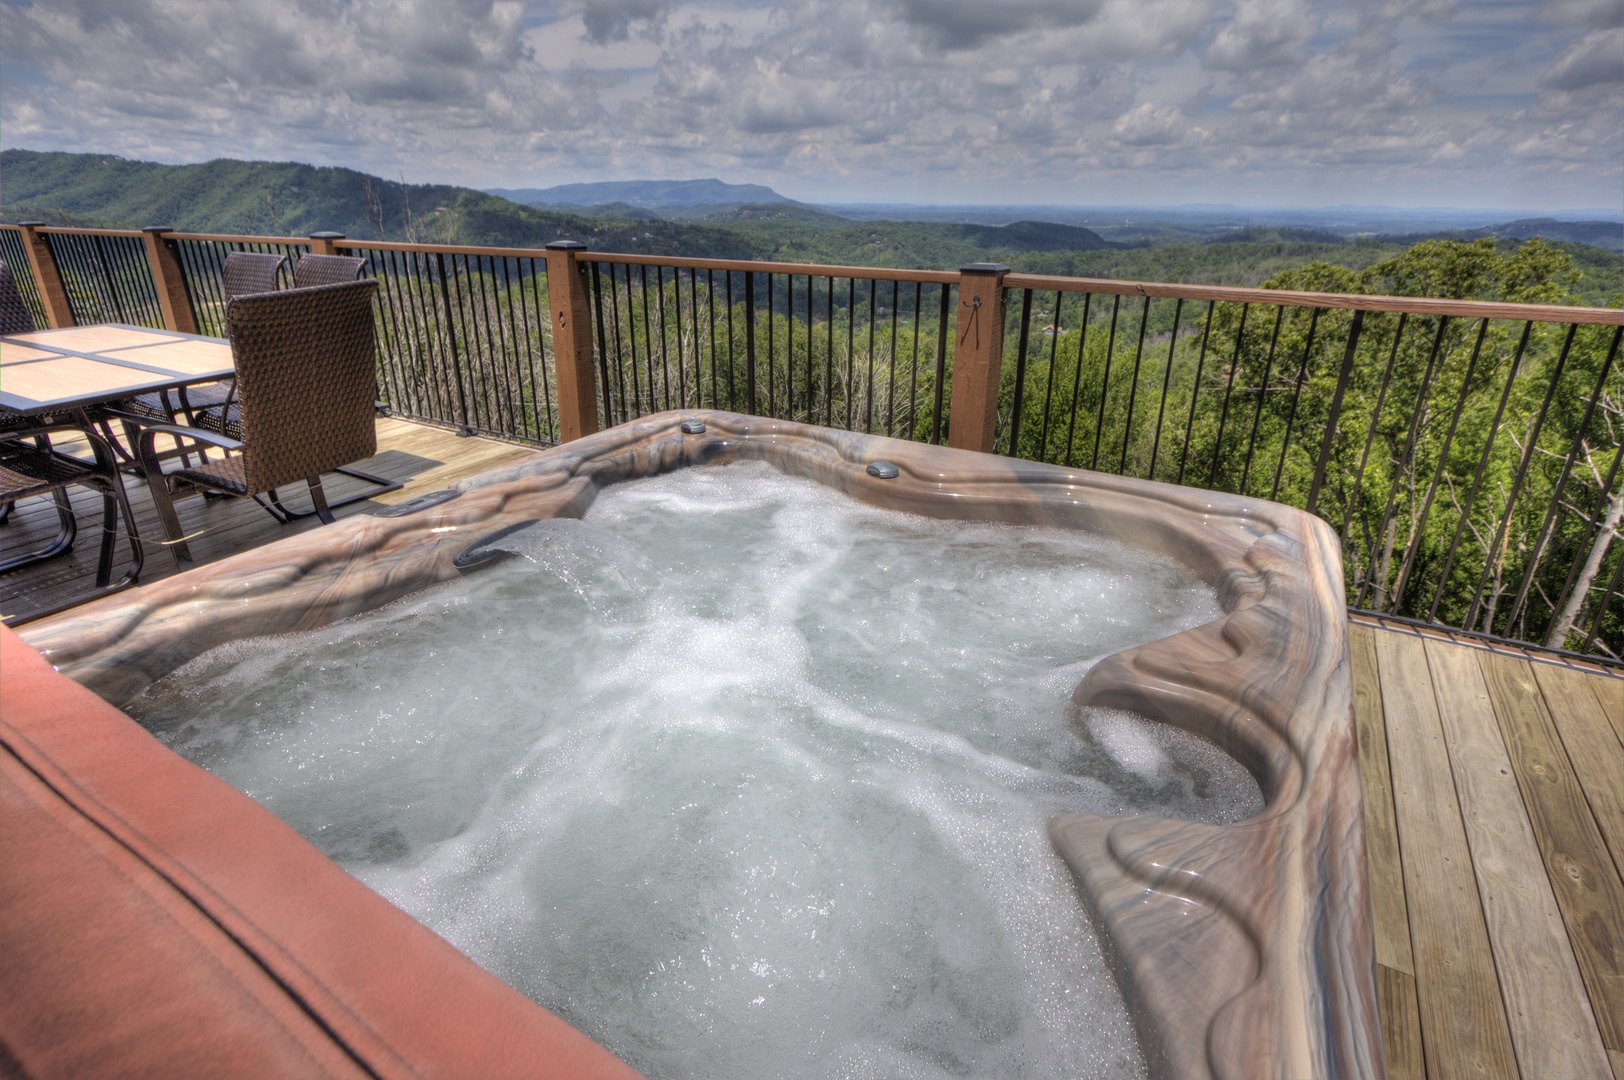 View from the hot tub at The Best View Lodge, a 5 bedroom cabin rental located in gatlinburg